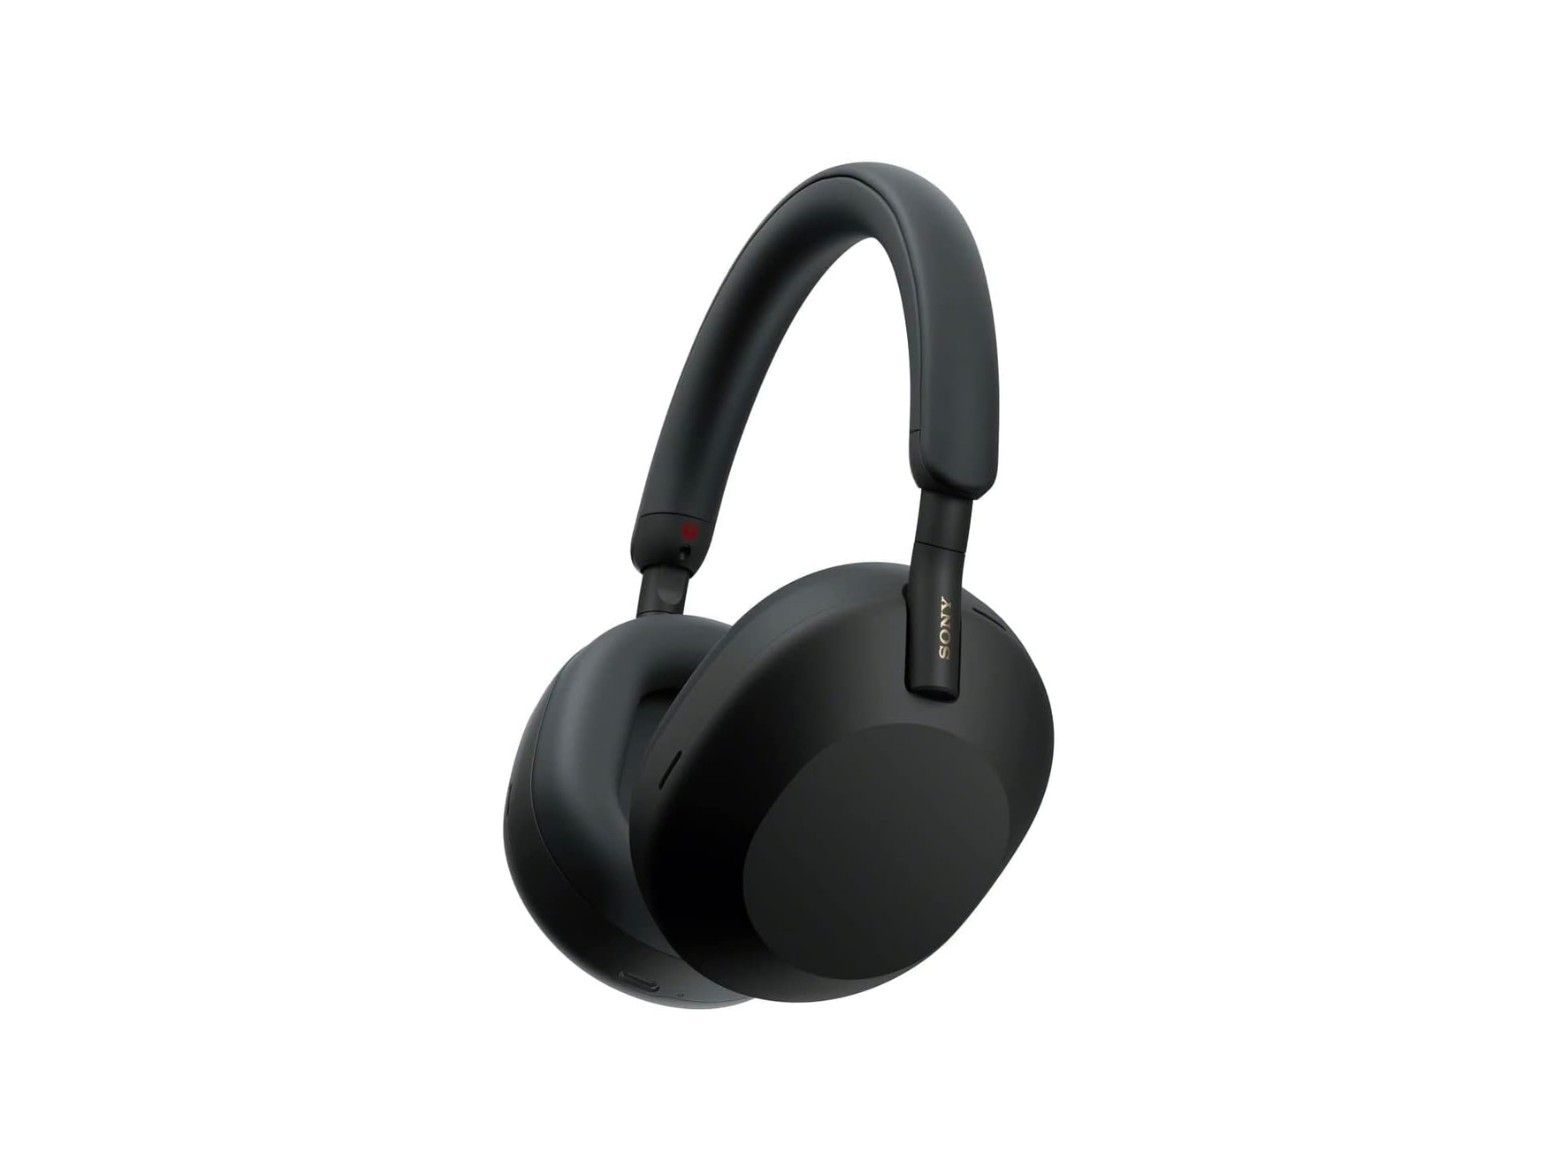 Sony WH-1000XM5 headphones for remote work